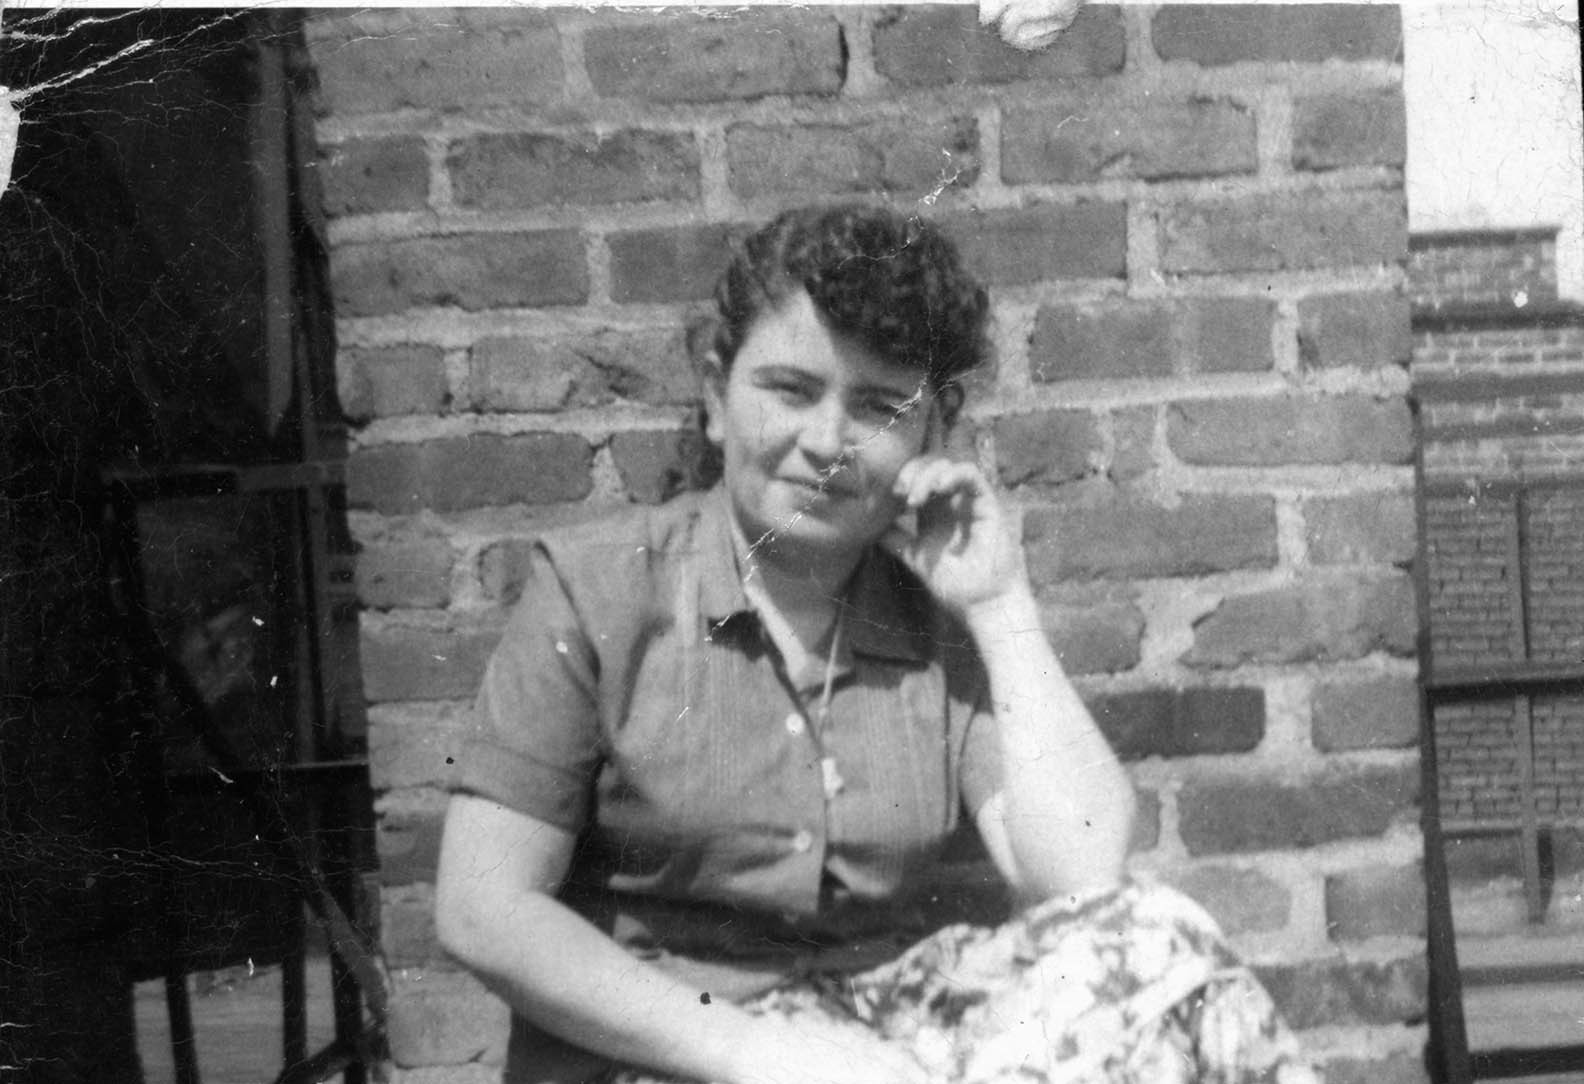 Ramonita Suarez, circa 1970, in a floral skirt and collared shirt posed with her hand on her cheek sitting on the rooftop of 103 Orchard Street